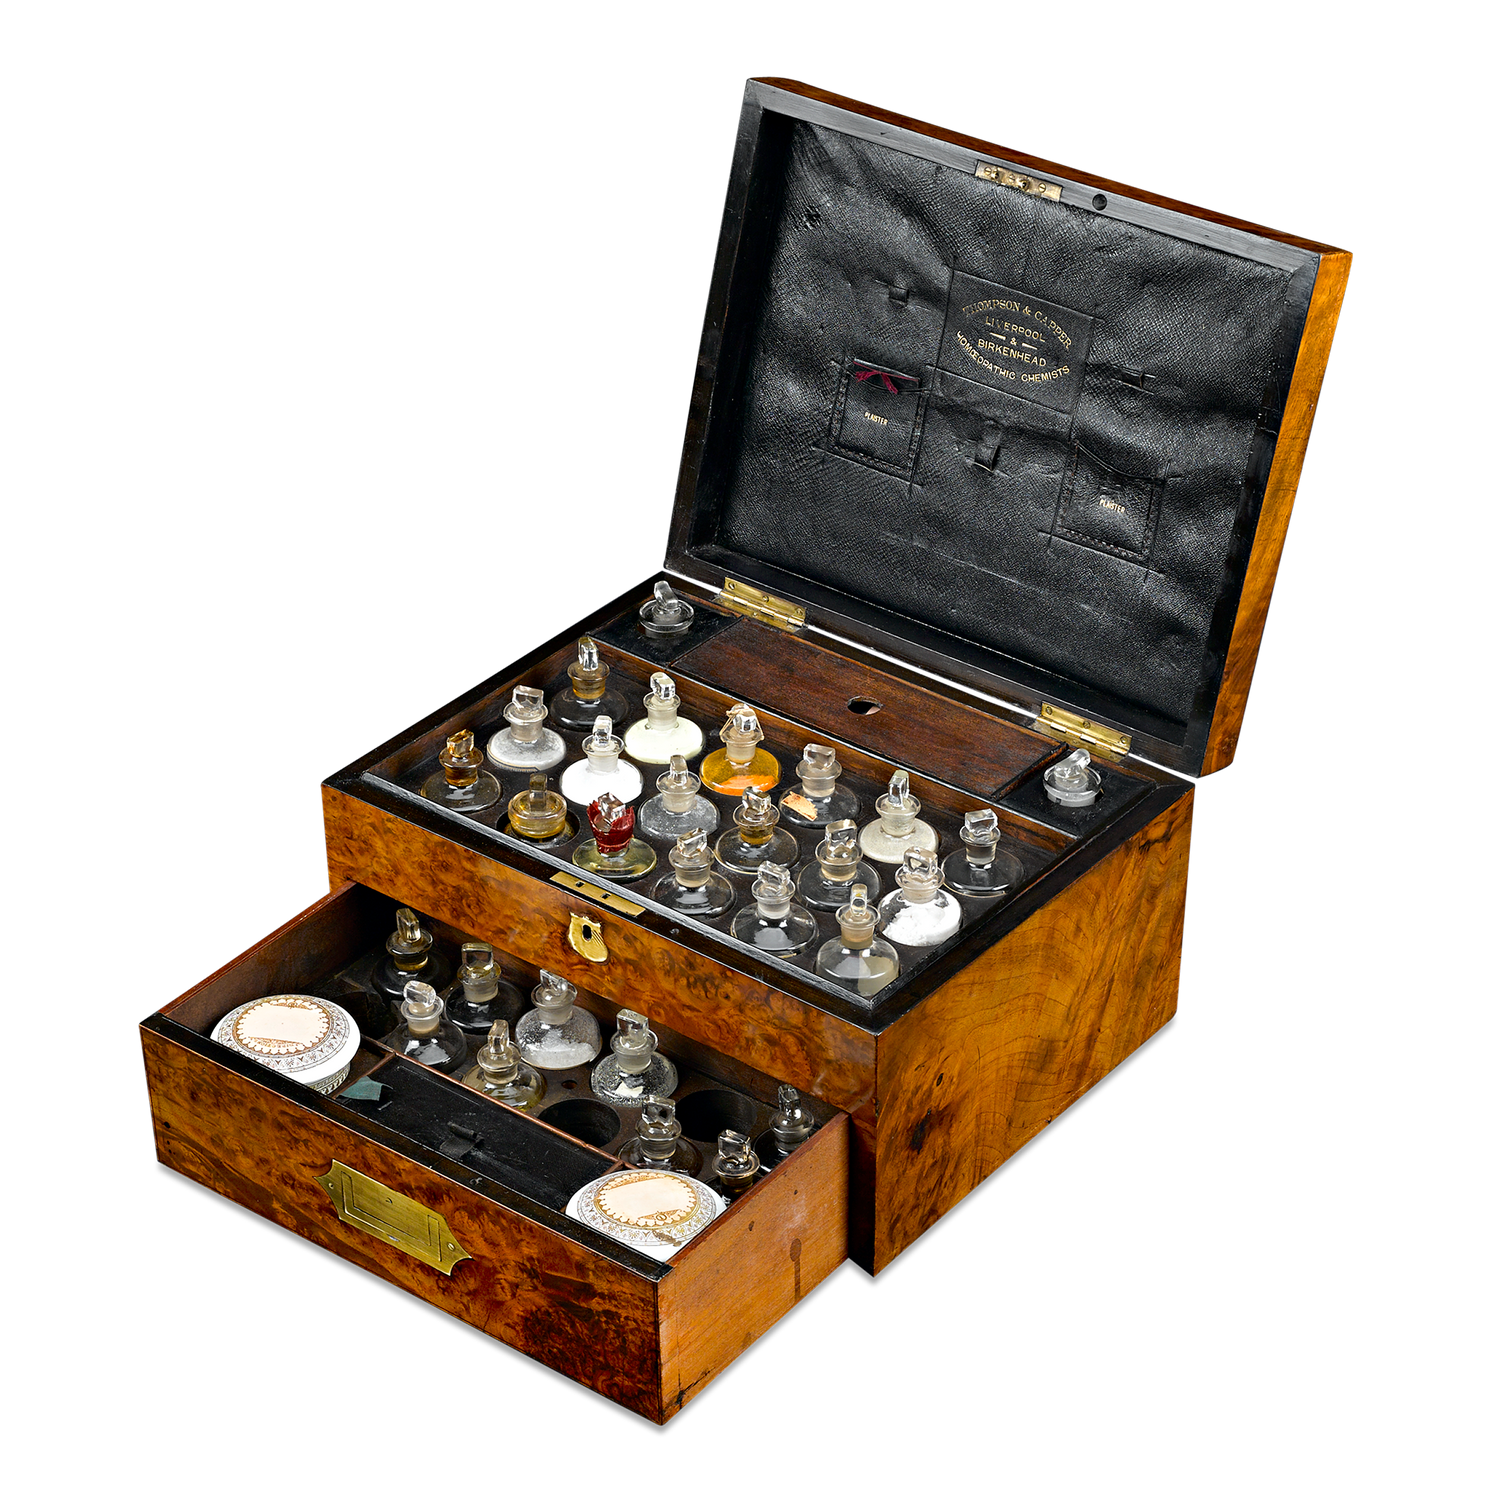 This incredible medicine chest would have been an invaluable part of the 19th-century household